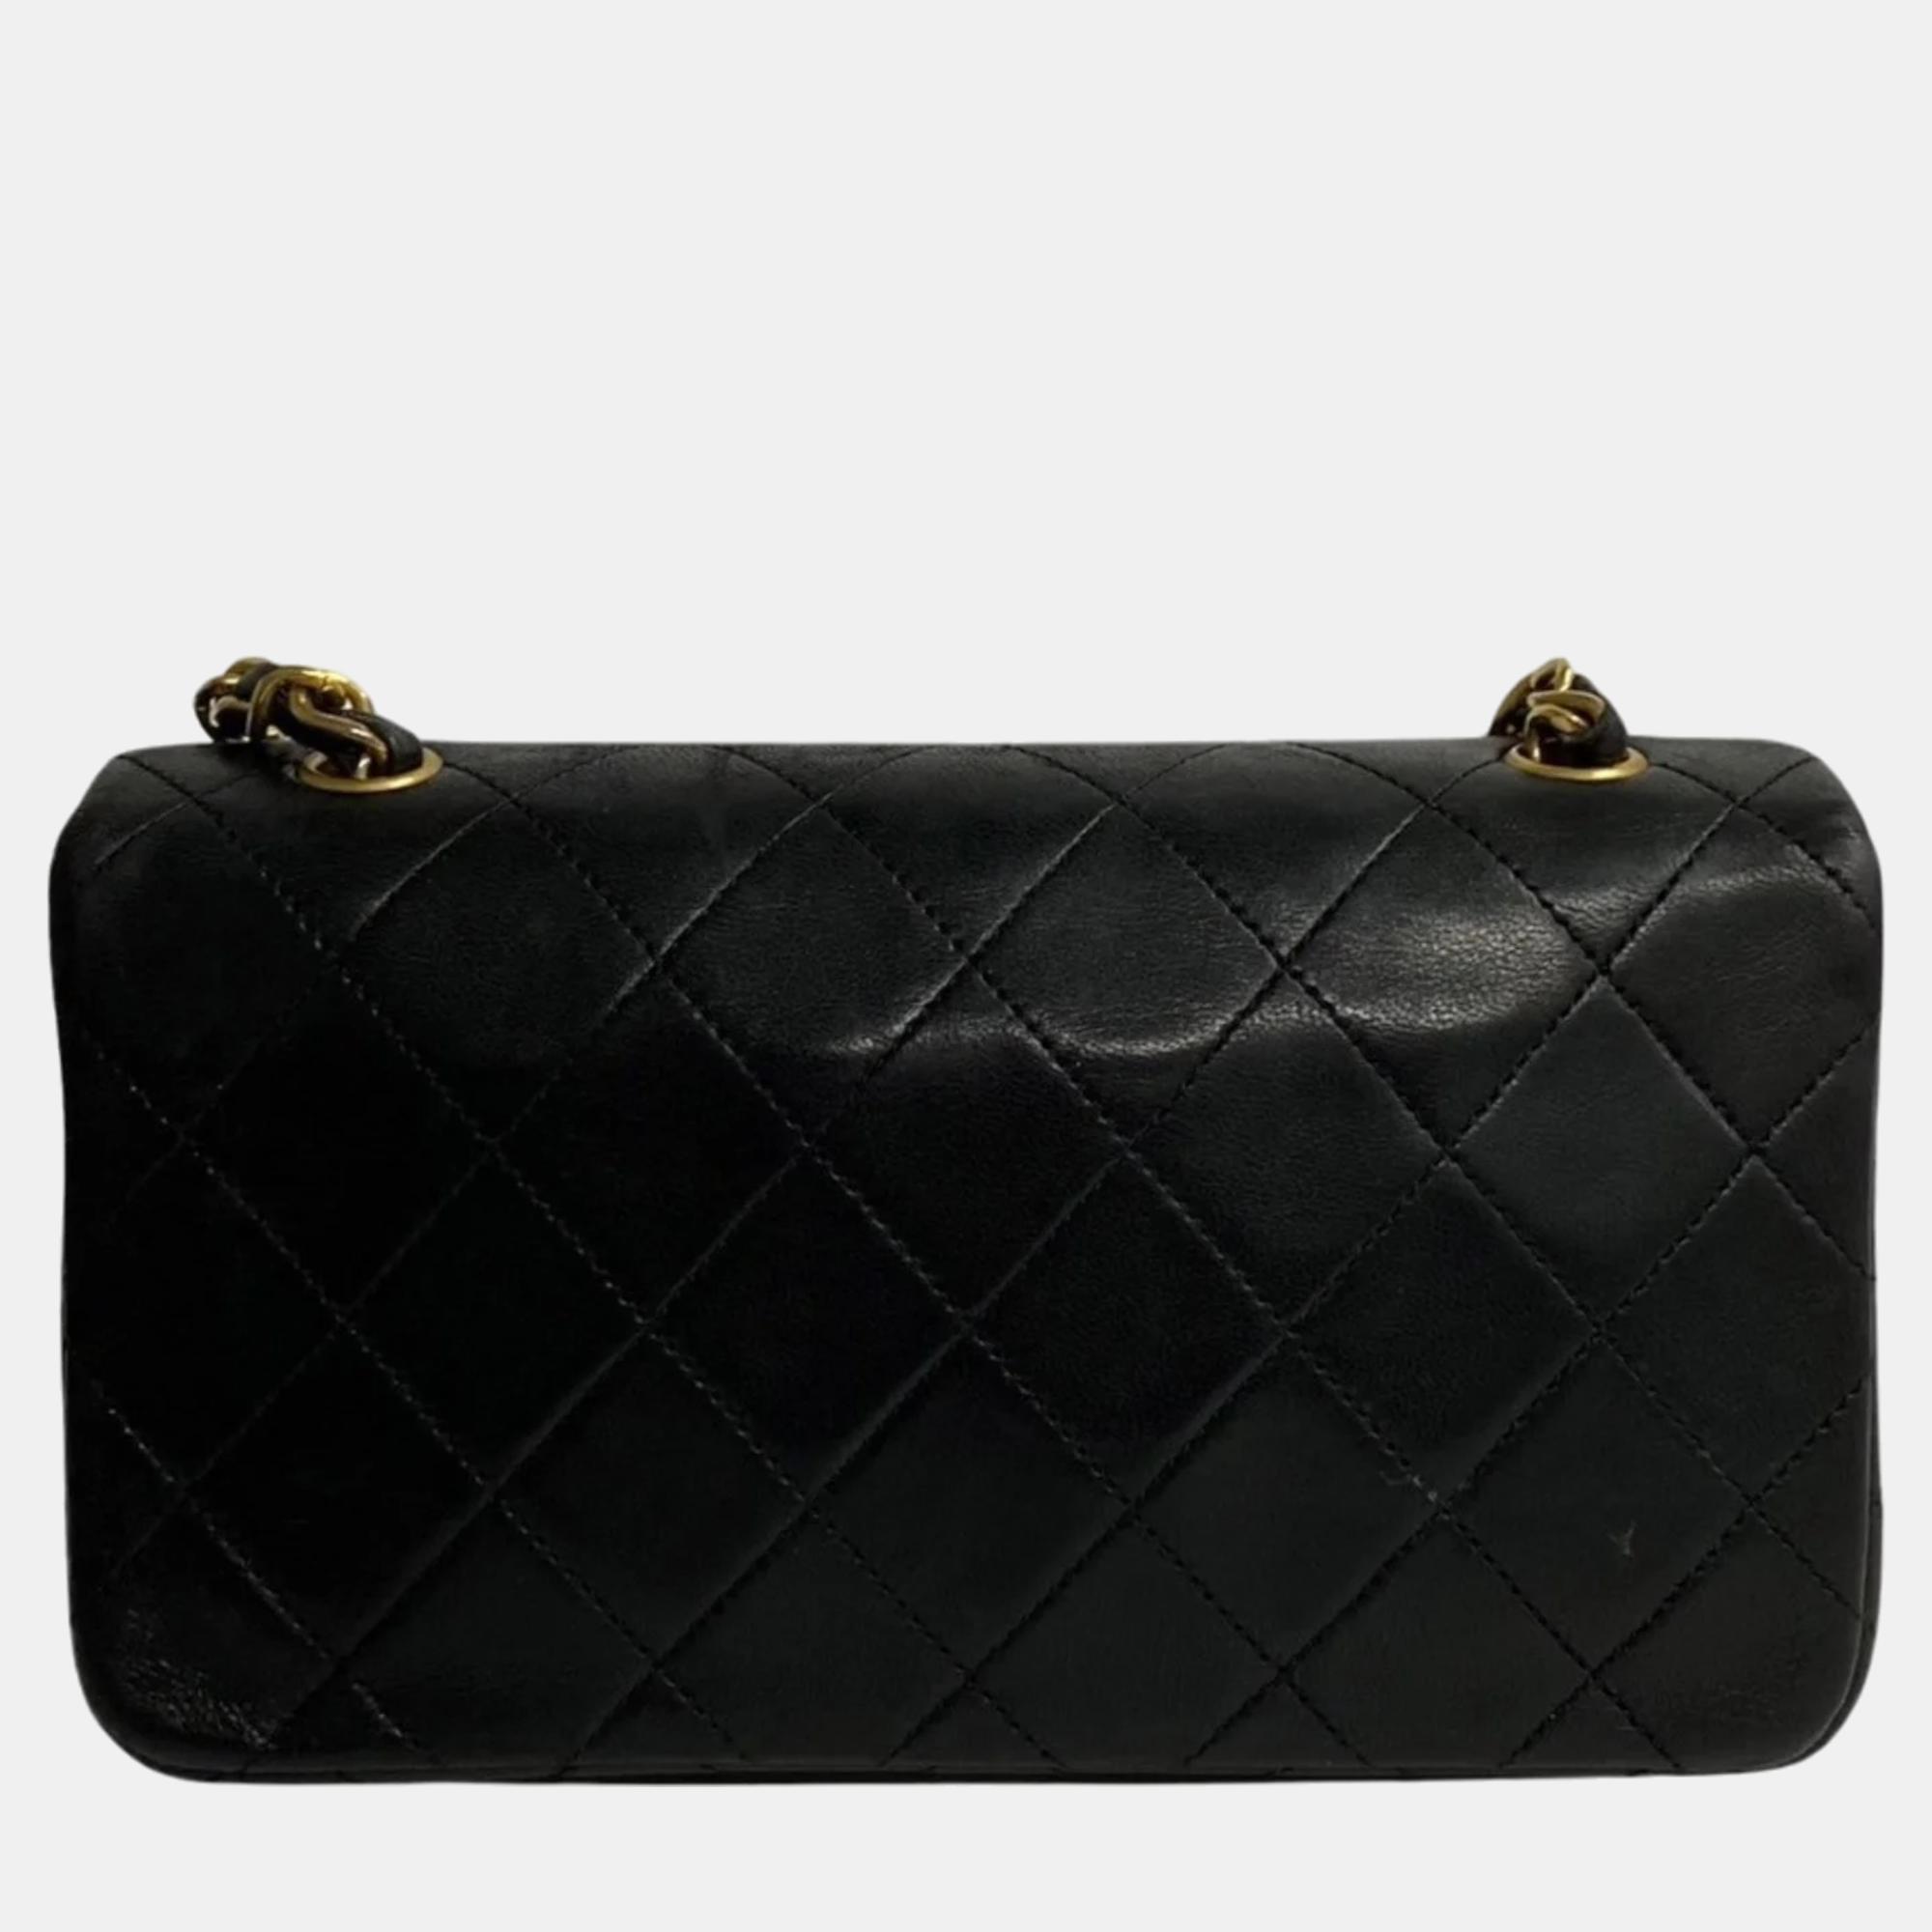 

Chanel Black Lambskin Leather CC Quilted Flap Bag